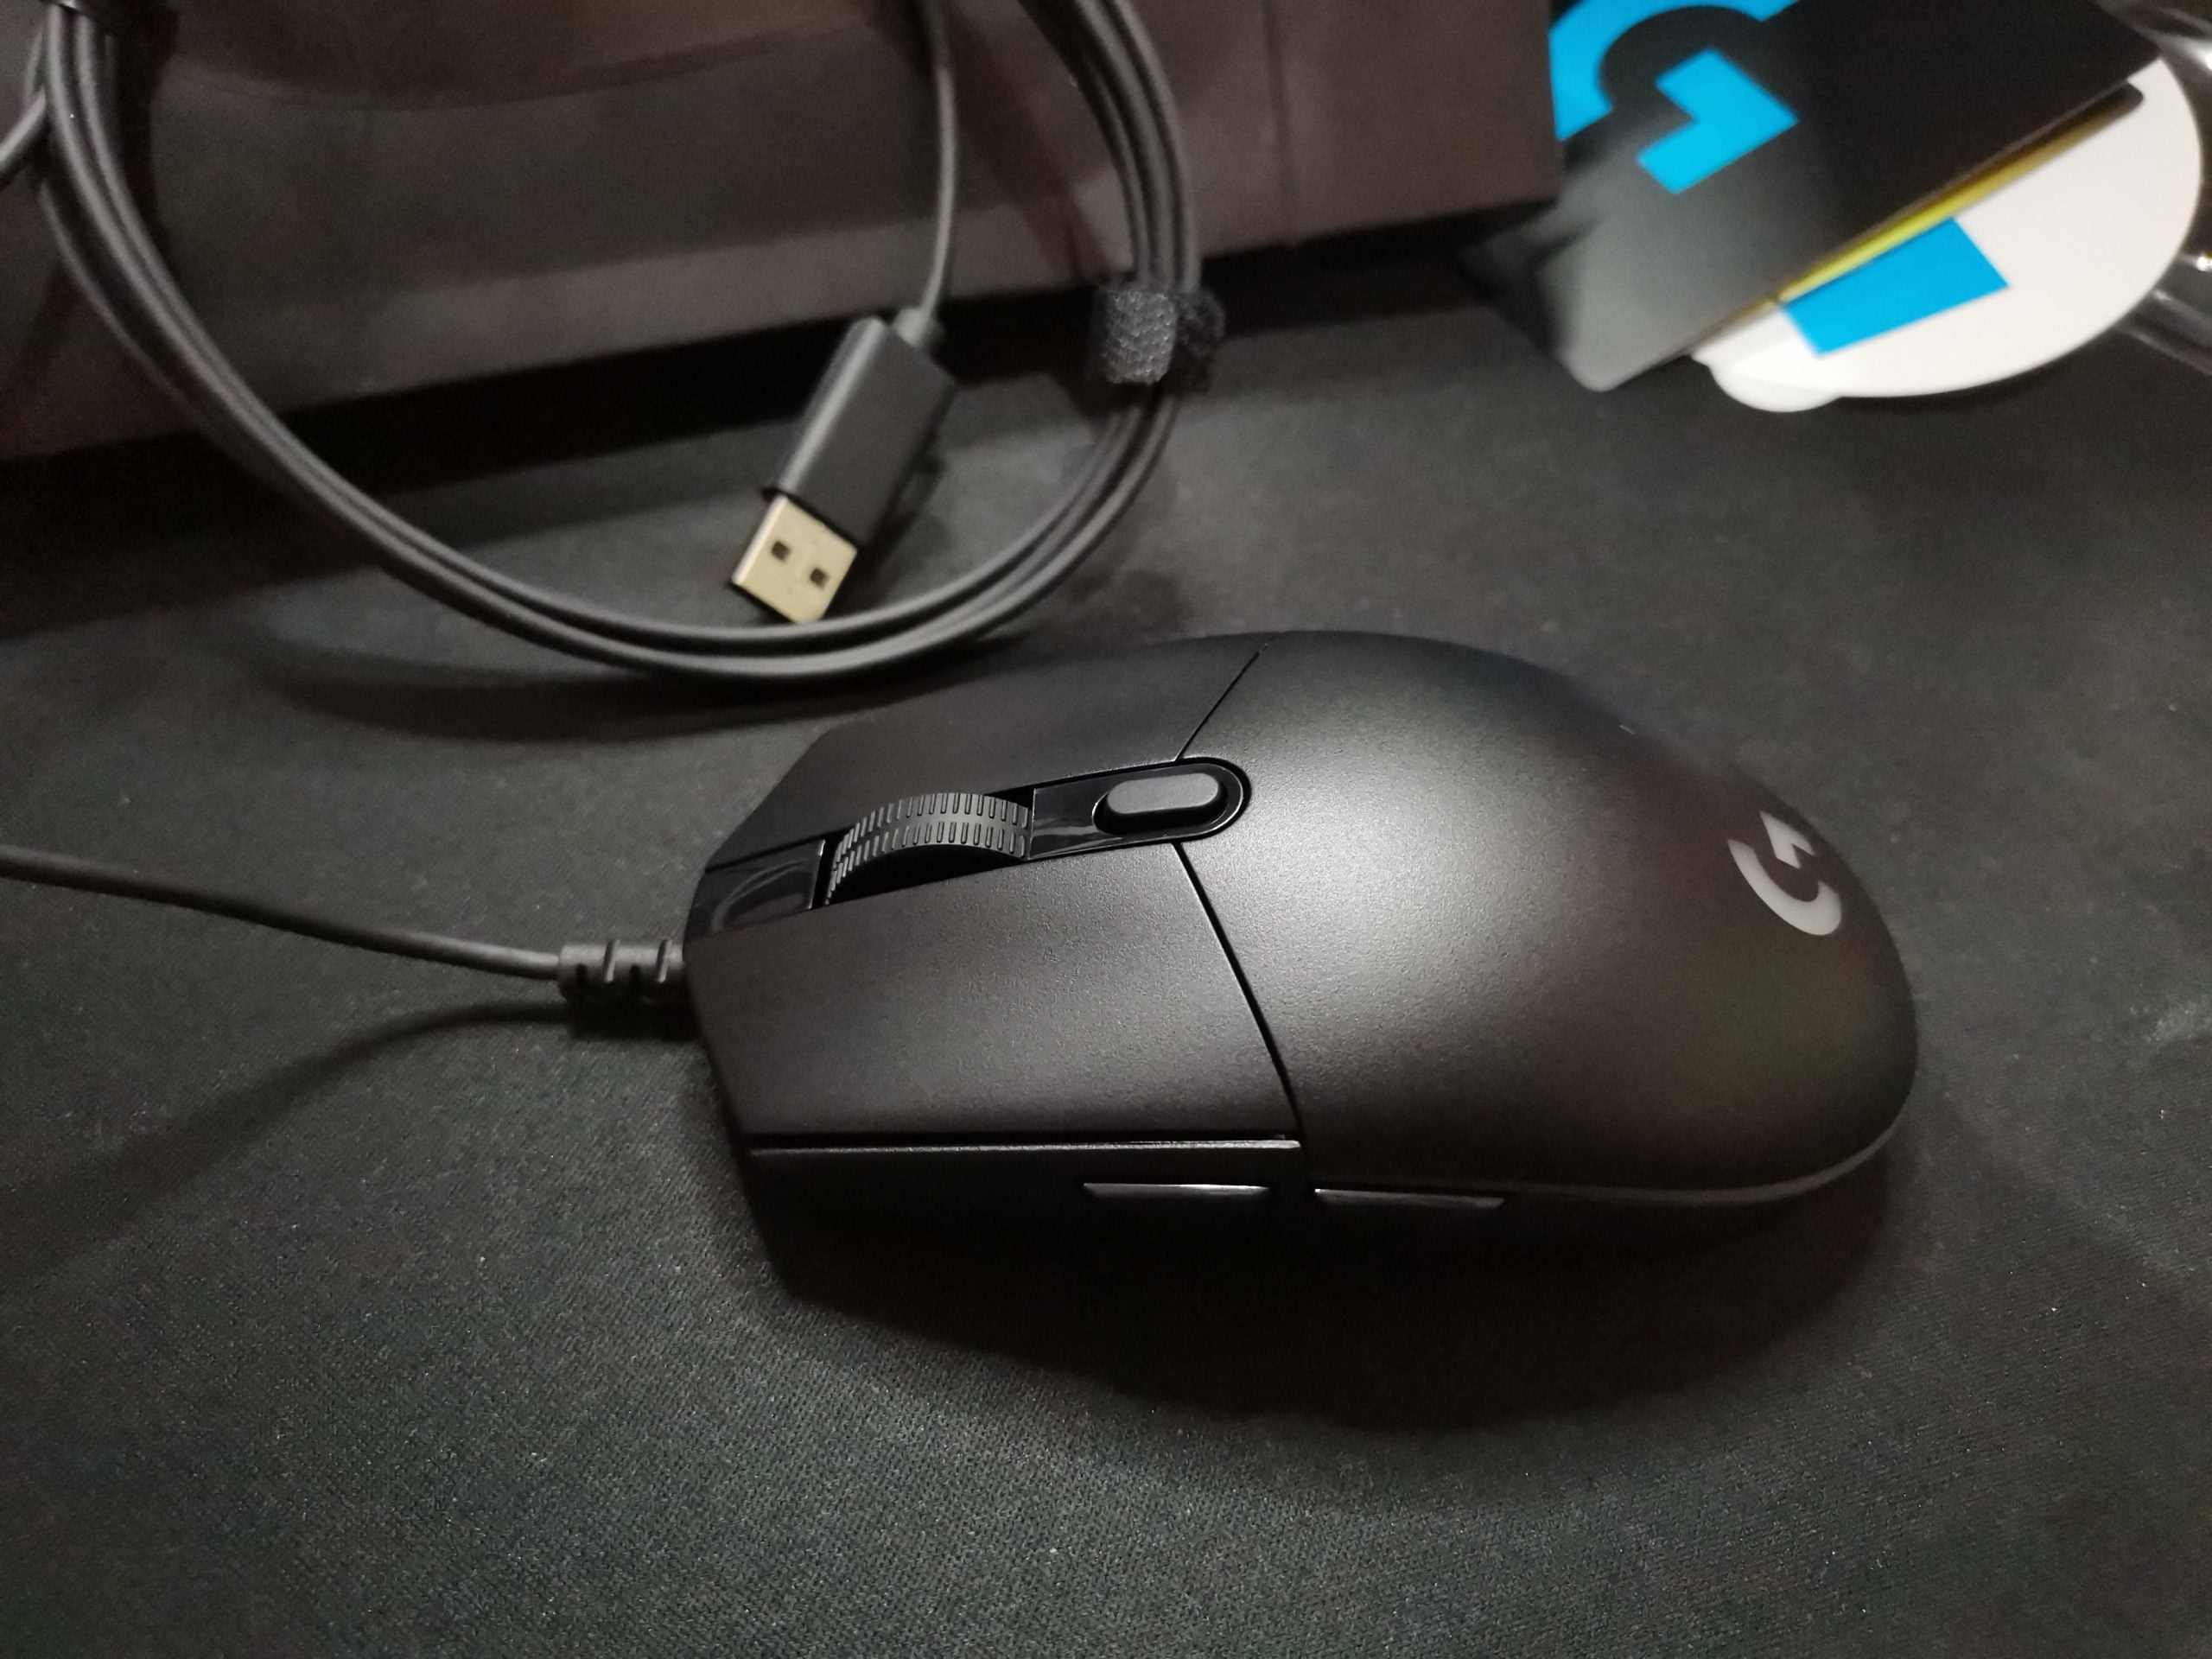 A Year After: Mouse – The Syndrome, and The Gear